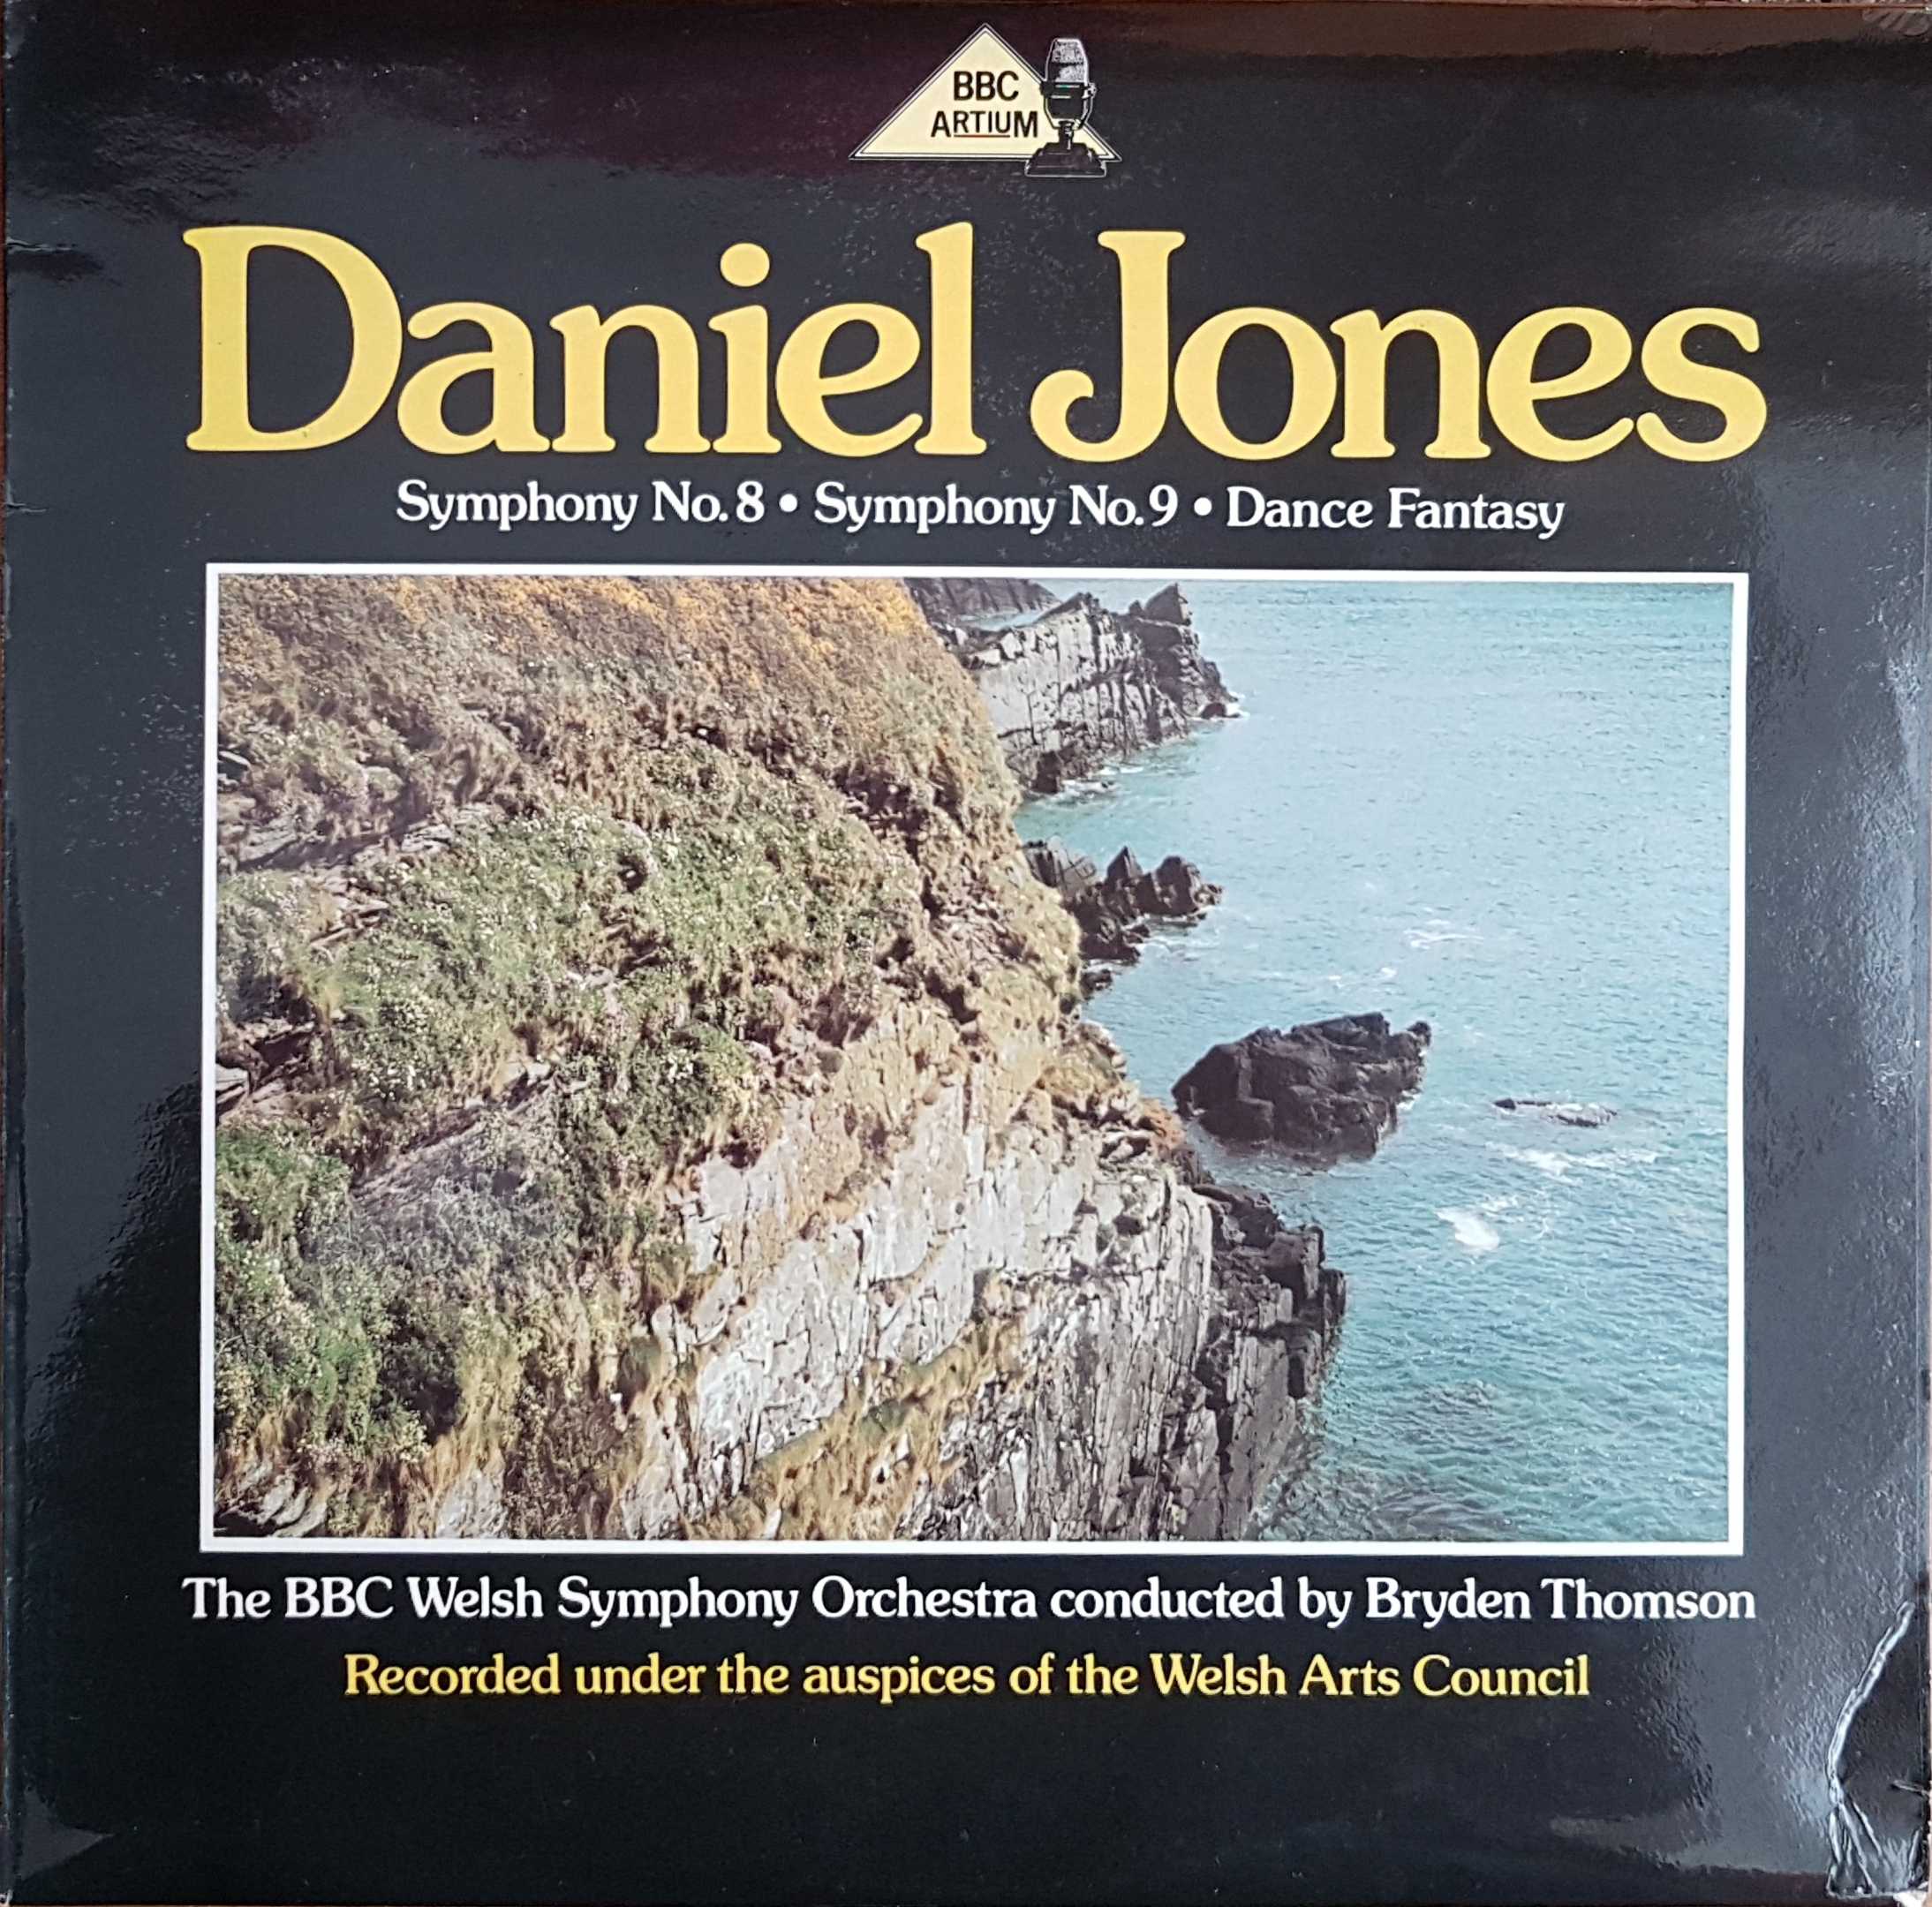 Picture of REGL 359 Daniel Jones - Symphony no. 8 & 9 & dance fantasy by artist Daniel Jones from the BBC albums - Records and Tapes library